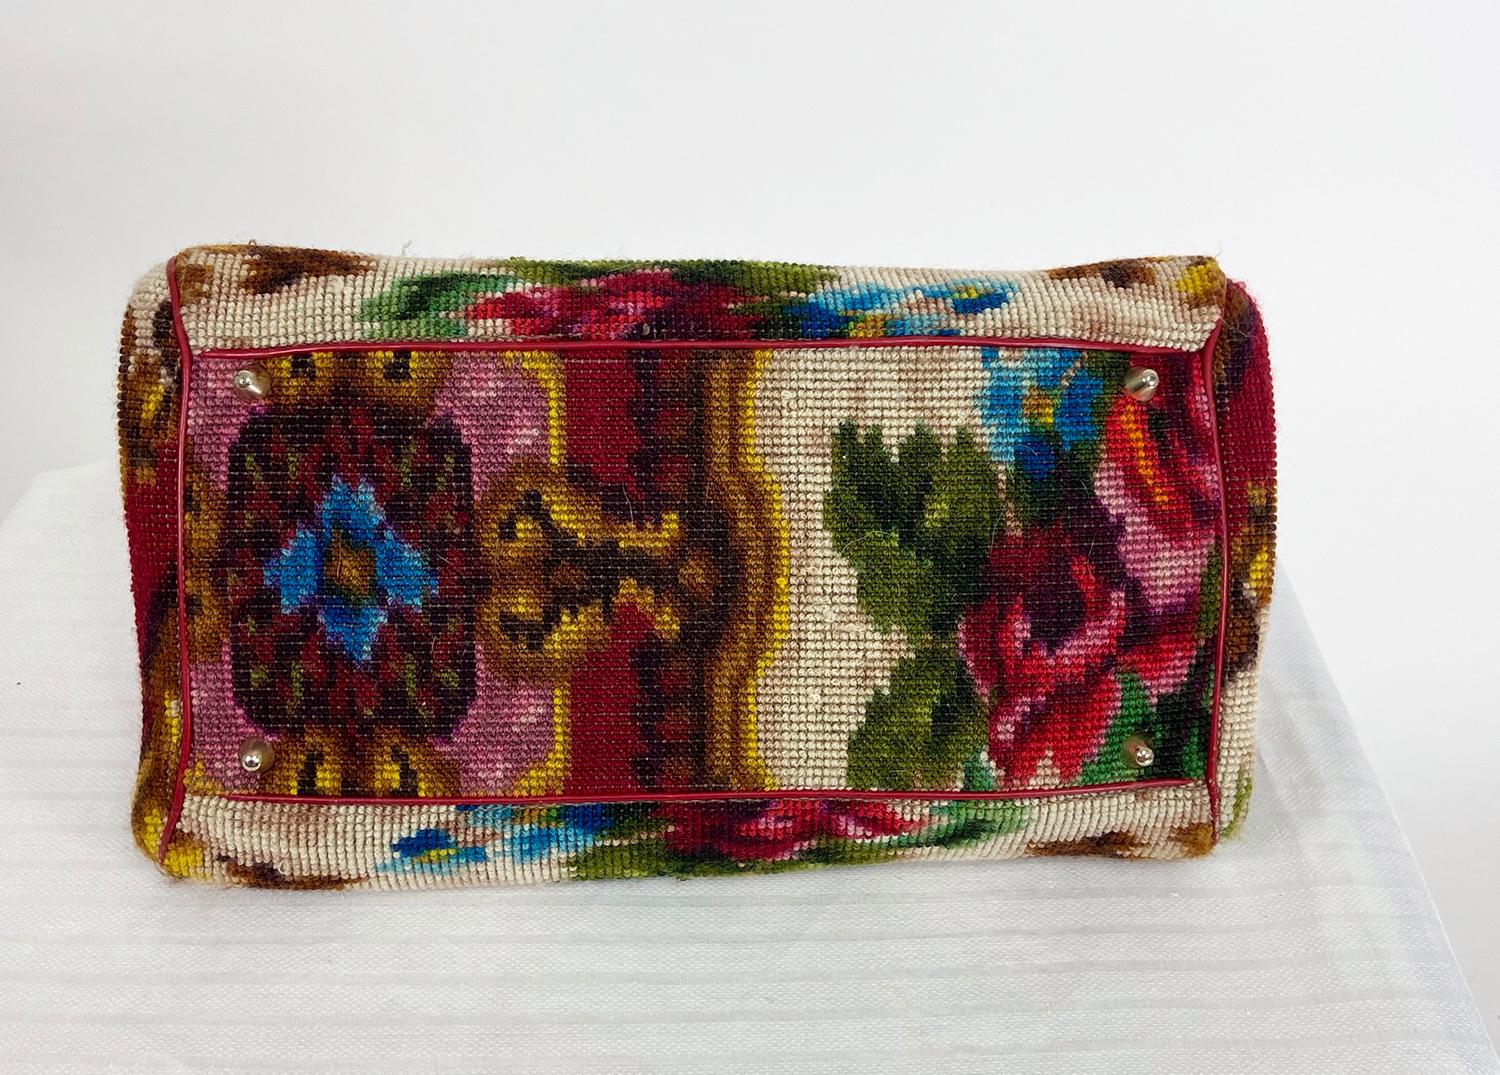 Koret roses frame carpet bag, rare 1960s leather interior handbag. From the Koret 1960s rose carpet luggage collection, originally offered in red or black. This luggage was made in Italy from actual needle point wool carpet. This Victorian style